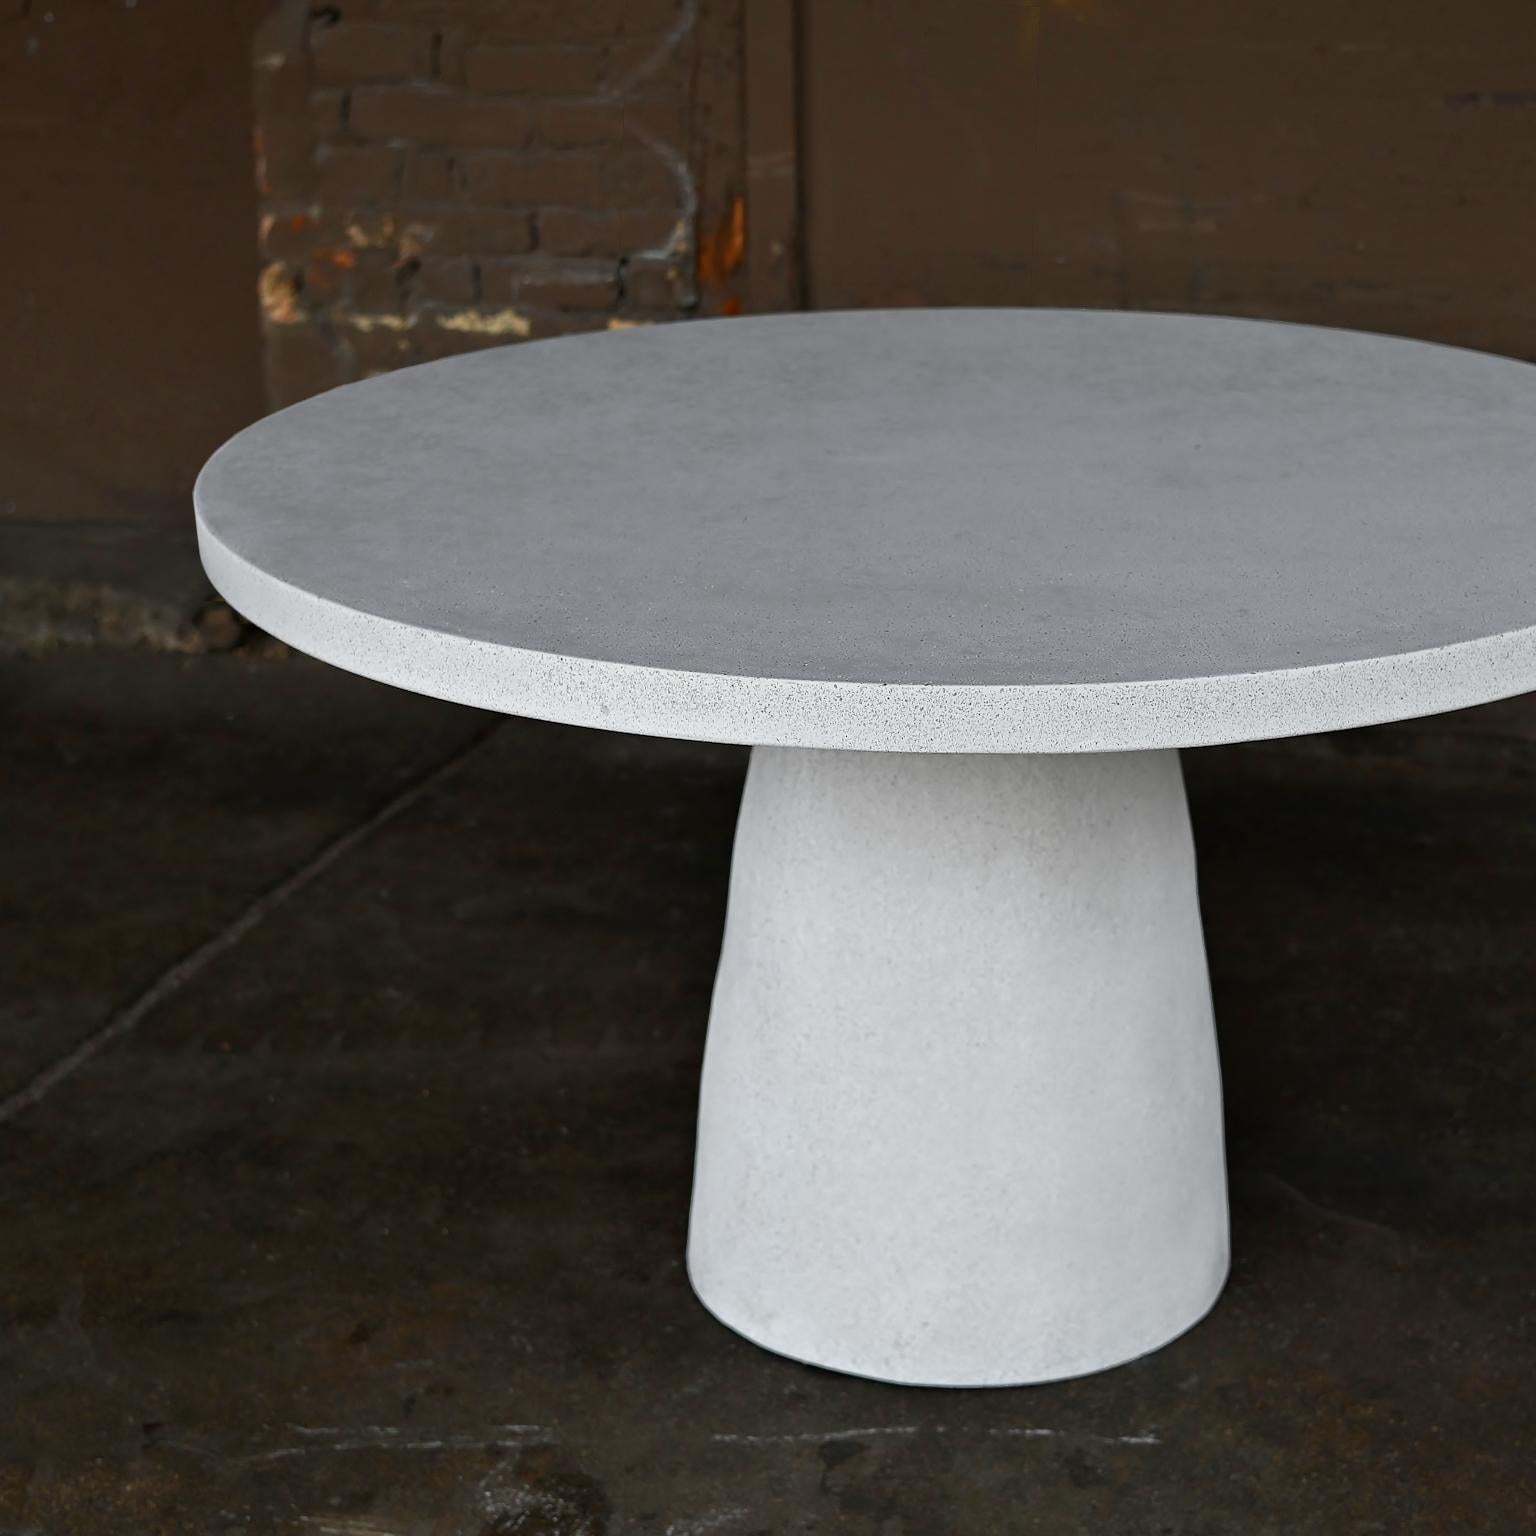 Minimalist Cast Resin 'Hive' Dining Table, White Stone Finish by Zachary A. Design For Sale